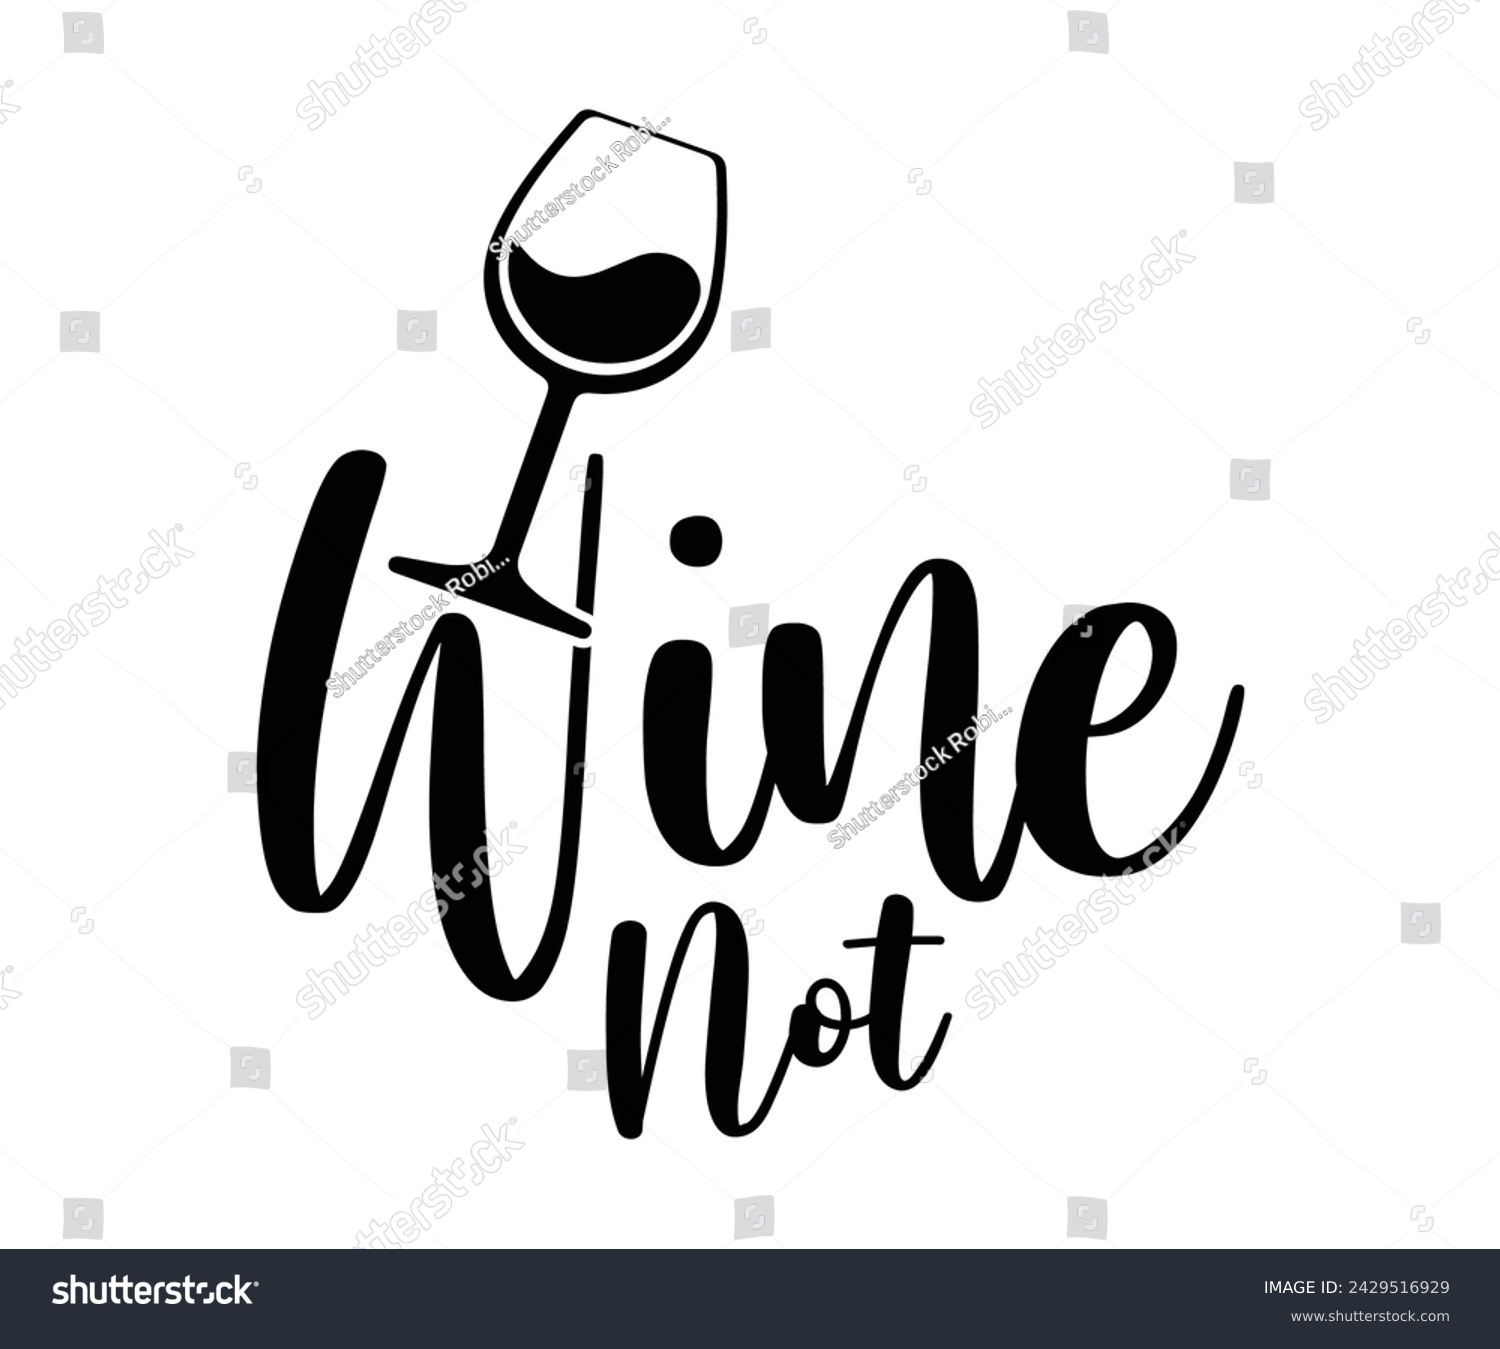 SVG of Wine Svg,Wine Quotes,Wine Glass Svg,Drinking Svg,Wine Lover T-shirt Svg,Wine Sayings, Alcohol Svg,Wine Cut Files,Cut File for Cricut,Silhouette svg